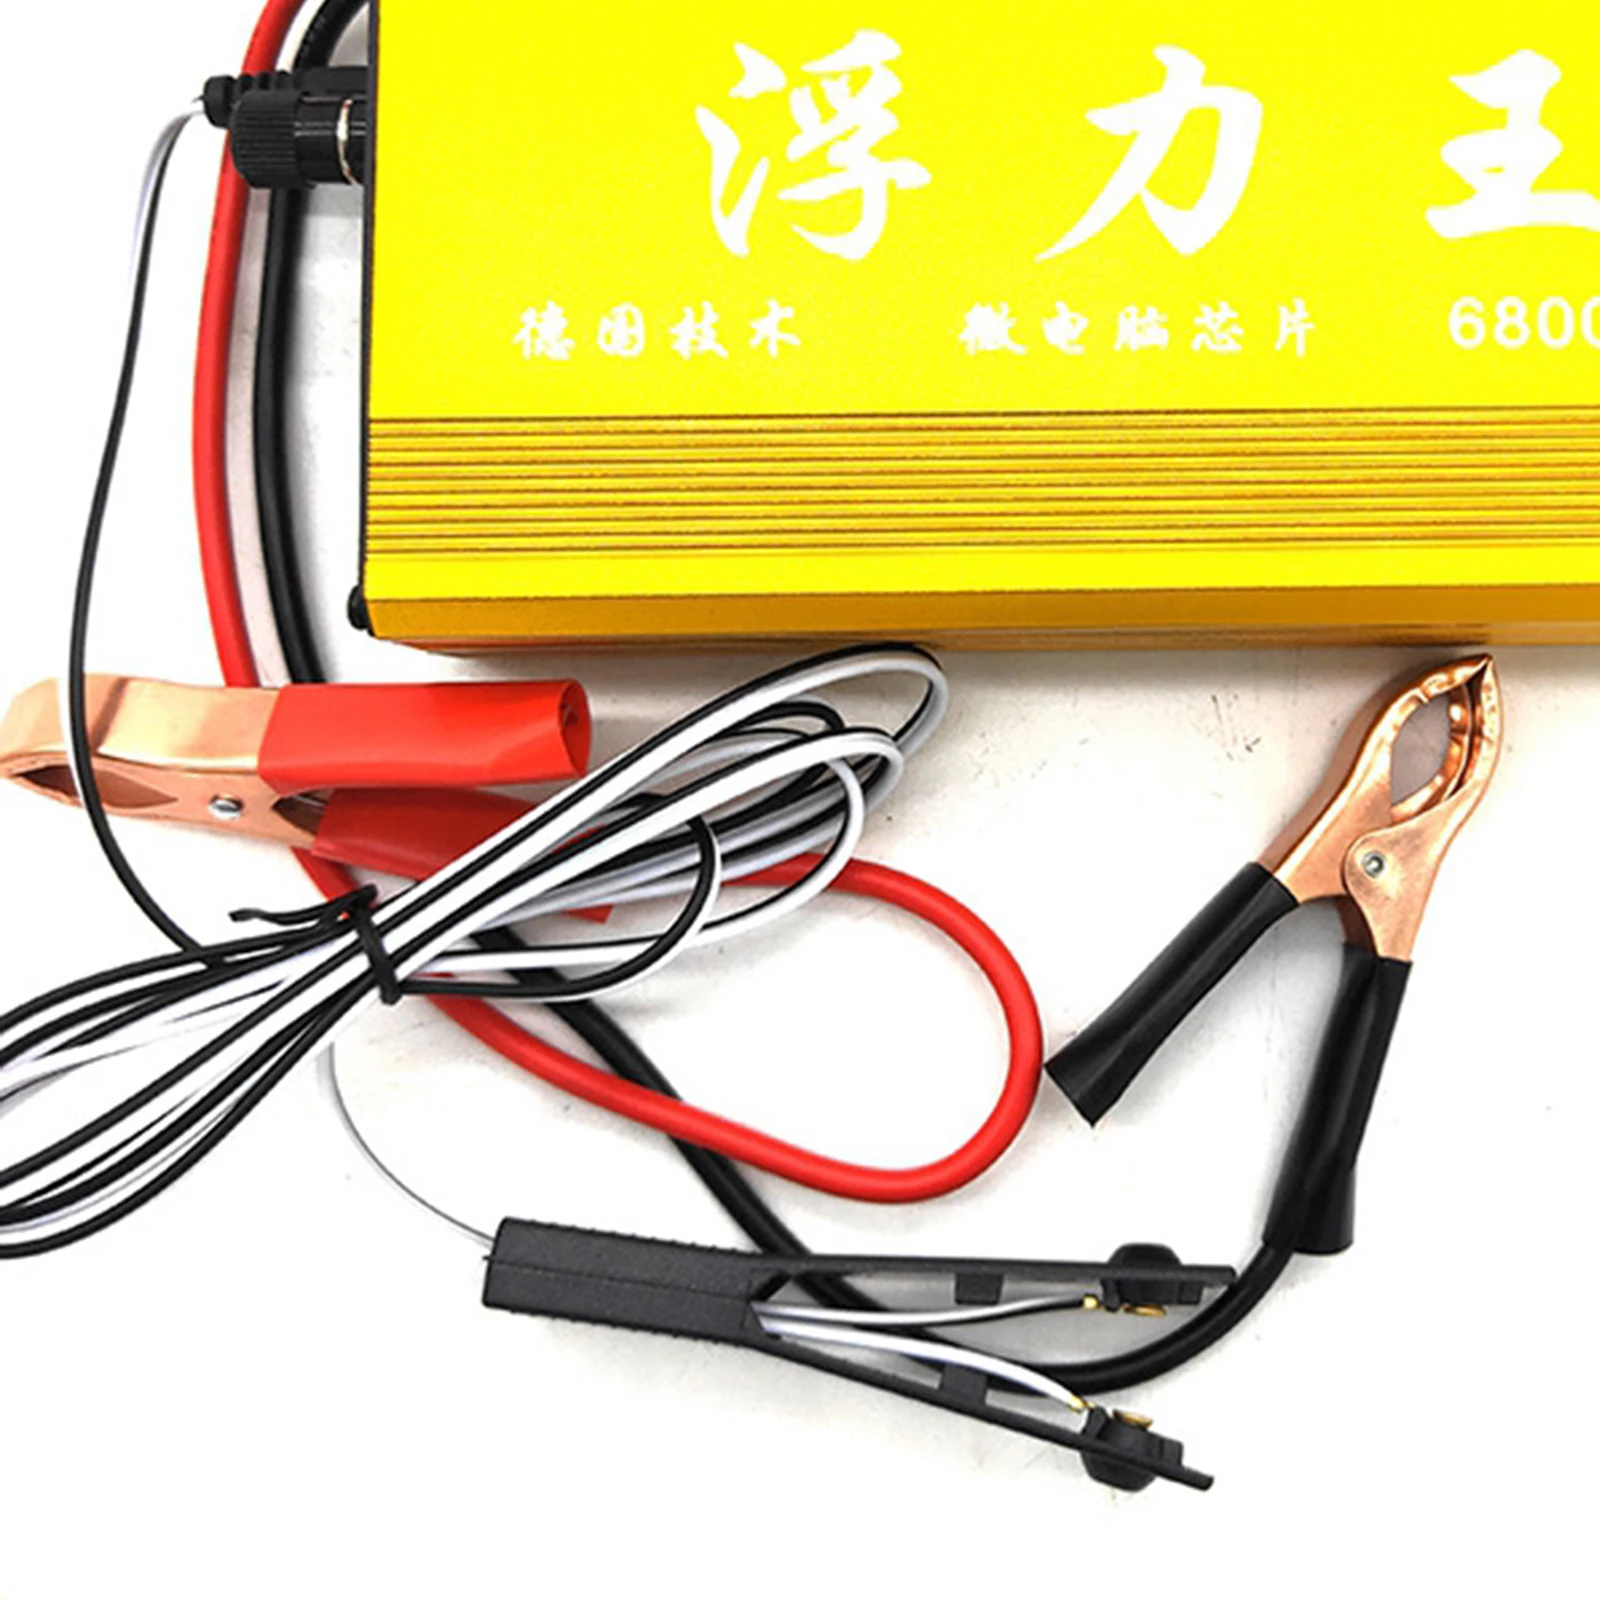 68000W DC 12V Ultrasonic Inverter Electronic  High Power Sine Wave Fishing Machine Safe Inverter Device Security Protector